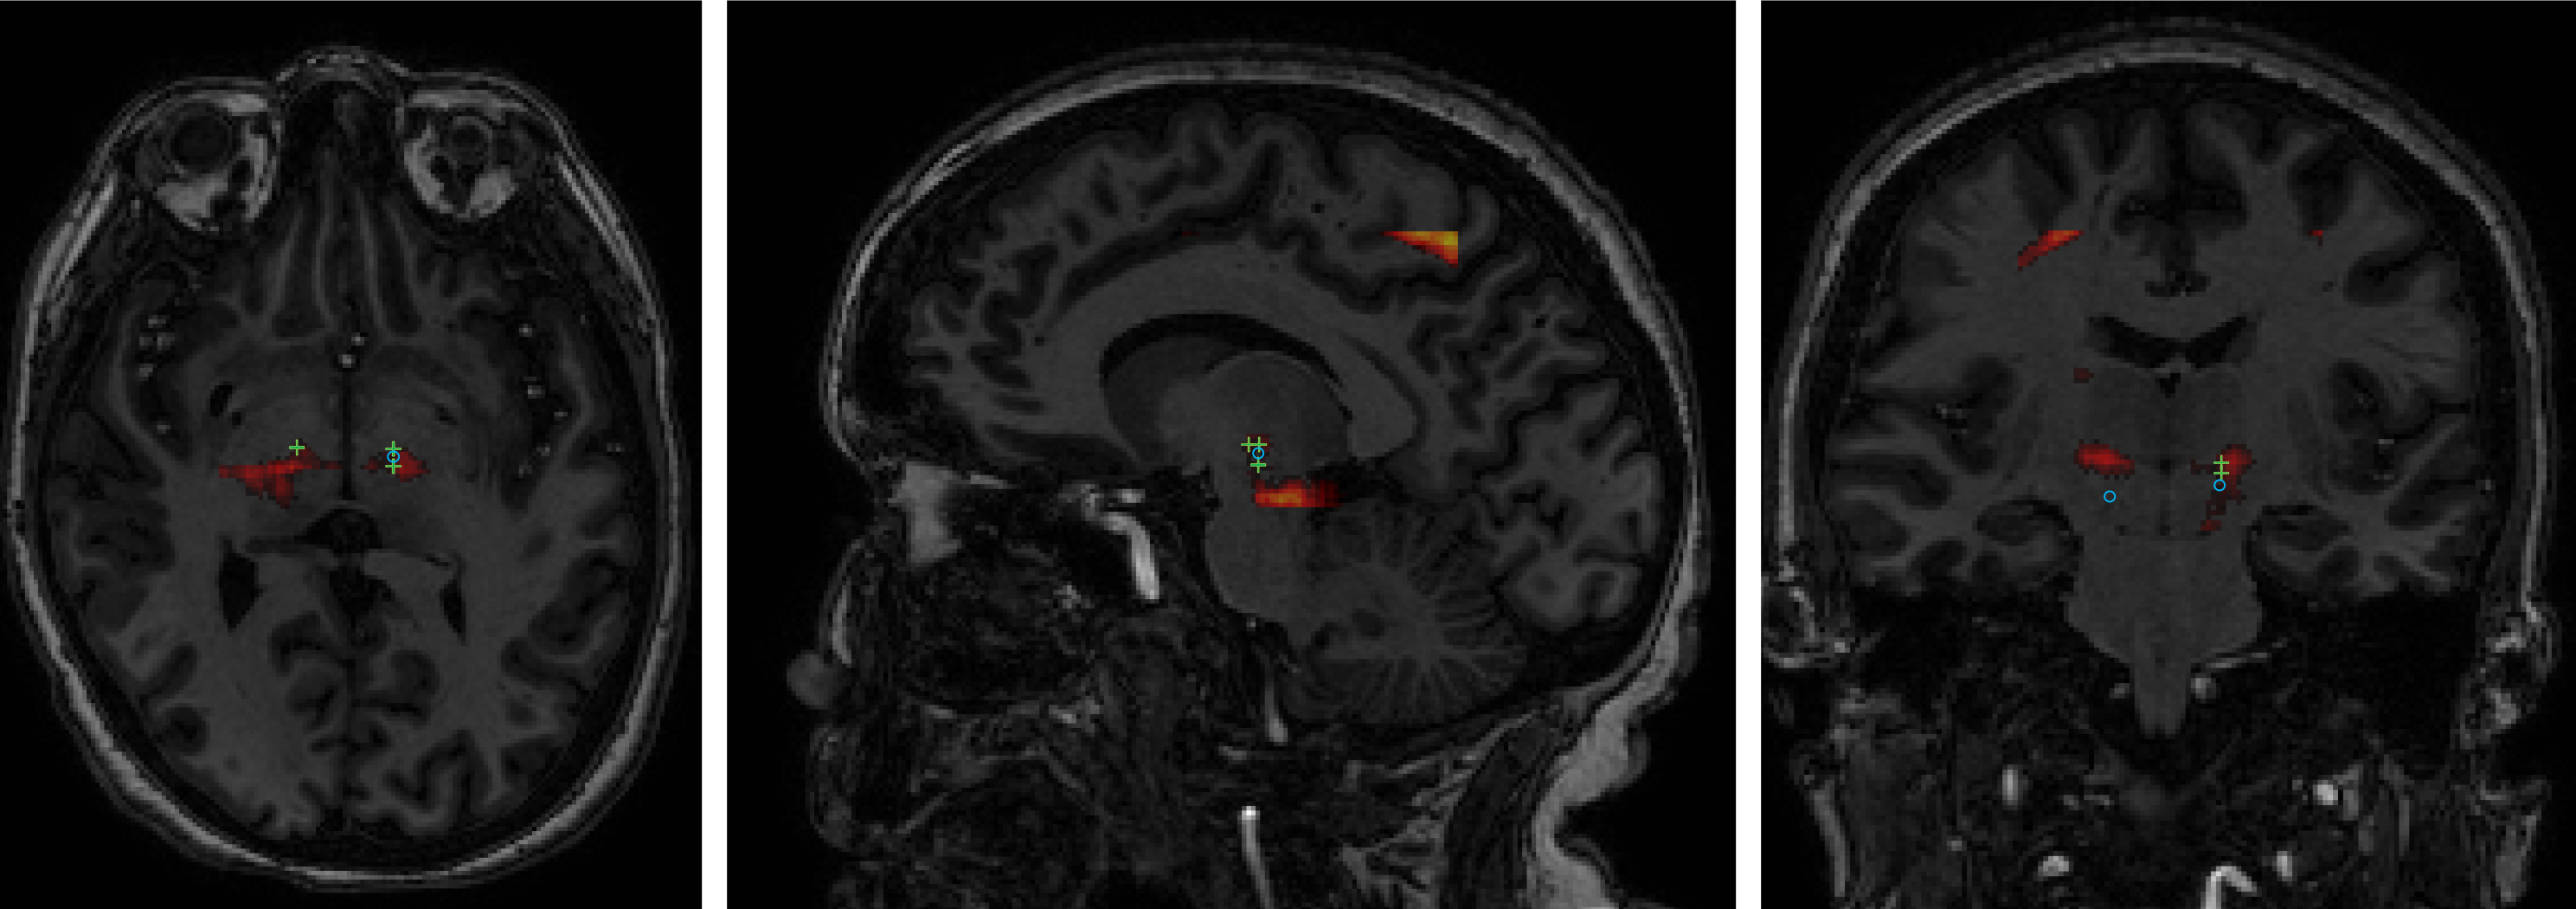 Machine - learning approximat ion of an efficacy map. Patient MRI image overlaid with probability of positive response assessed on a sliding patch basis (assuming an infeasible stimulation at every voxel). Green crosses indicate actual intraope rative stimulation locations with a positi ve response. Blue circles indicate intraoperative stimulation locations with a null response. 